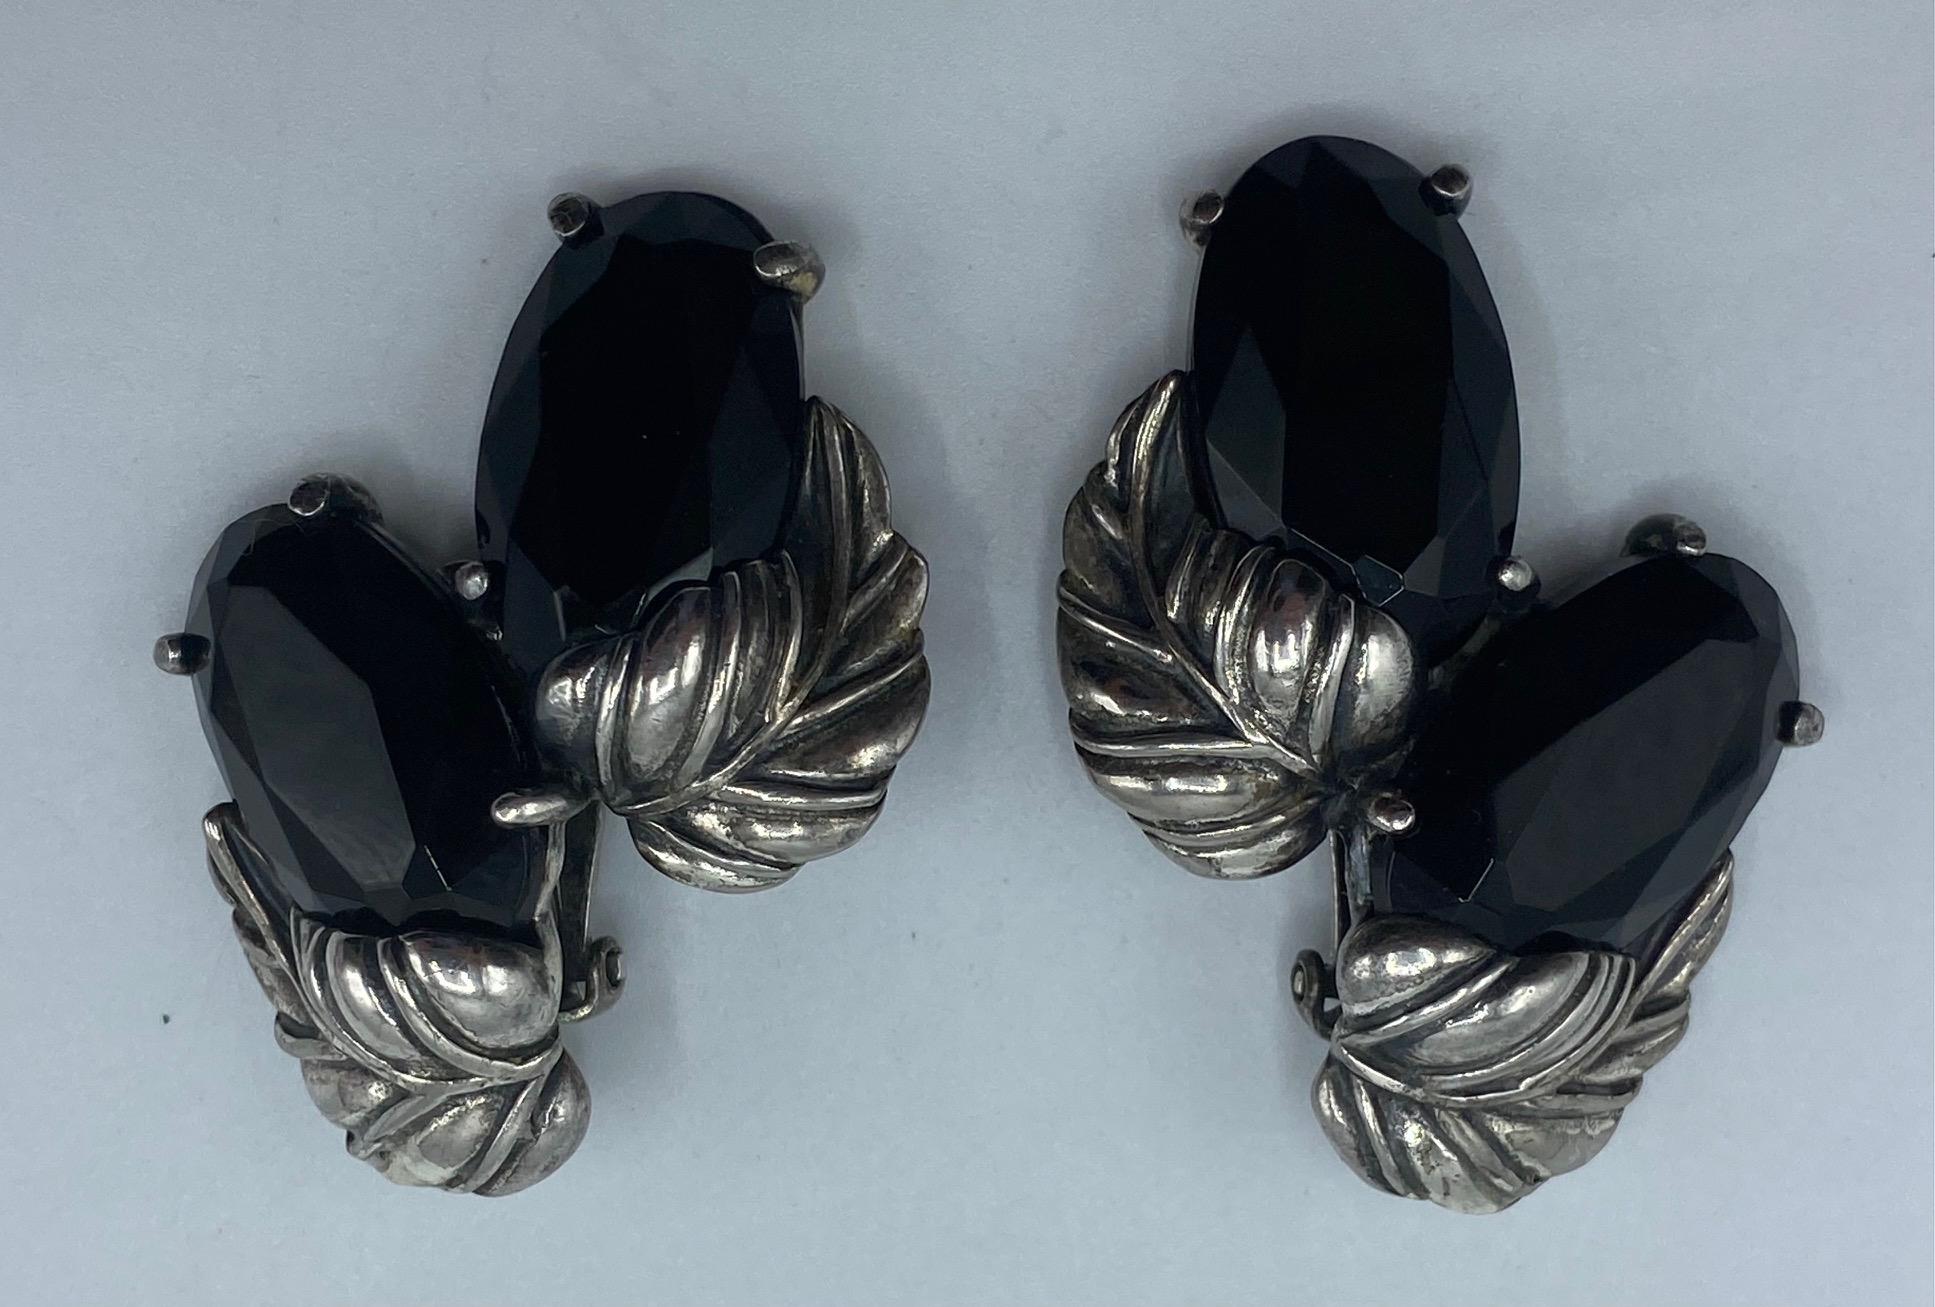 Schiaparelli 1950s Silver Leaves and Oval Black Stone Bracelet and Earrings Set 9